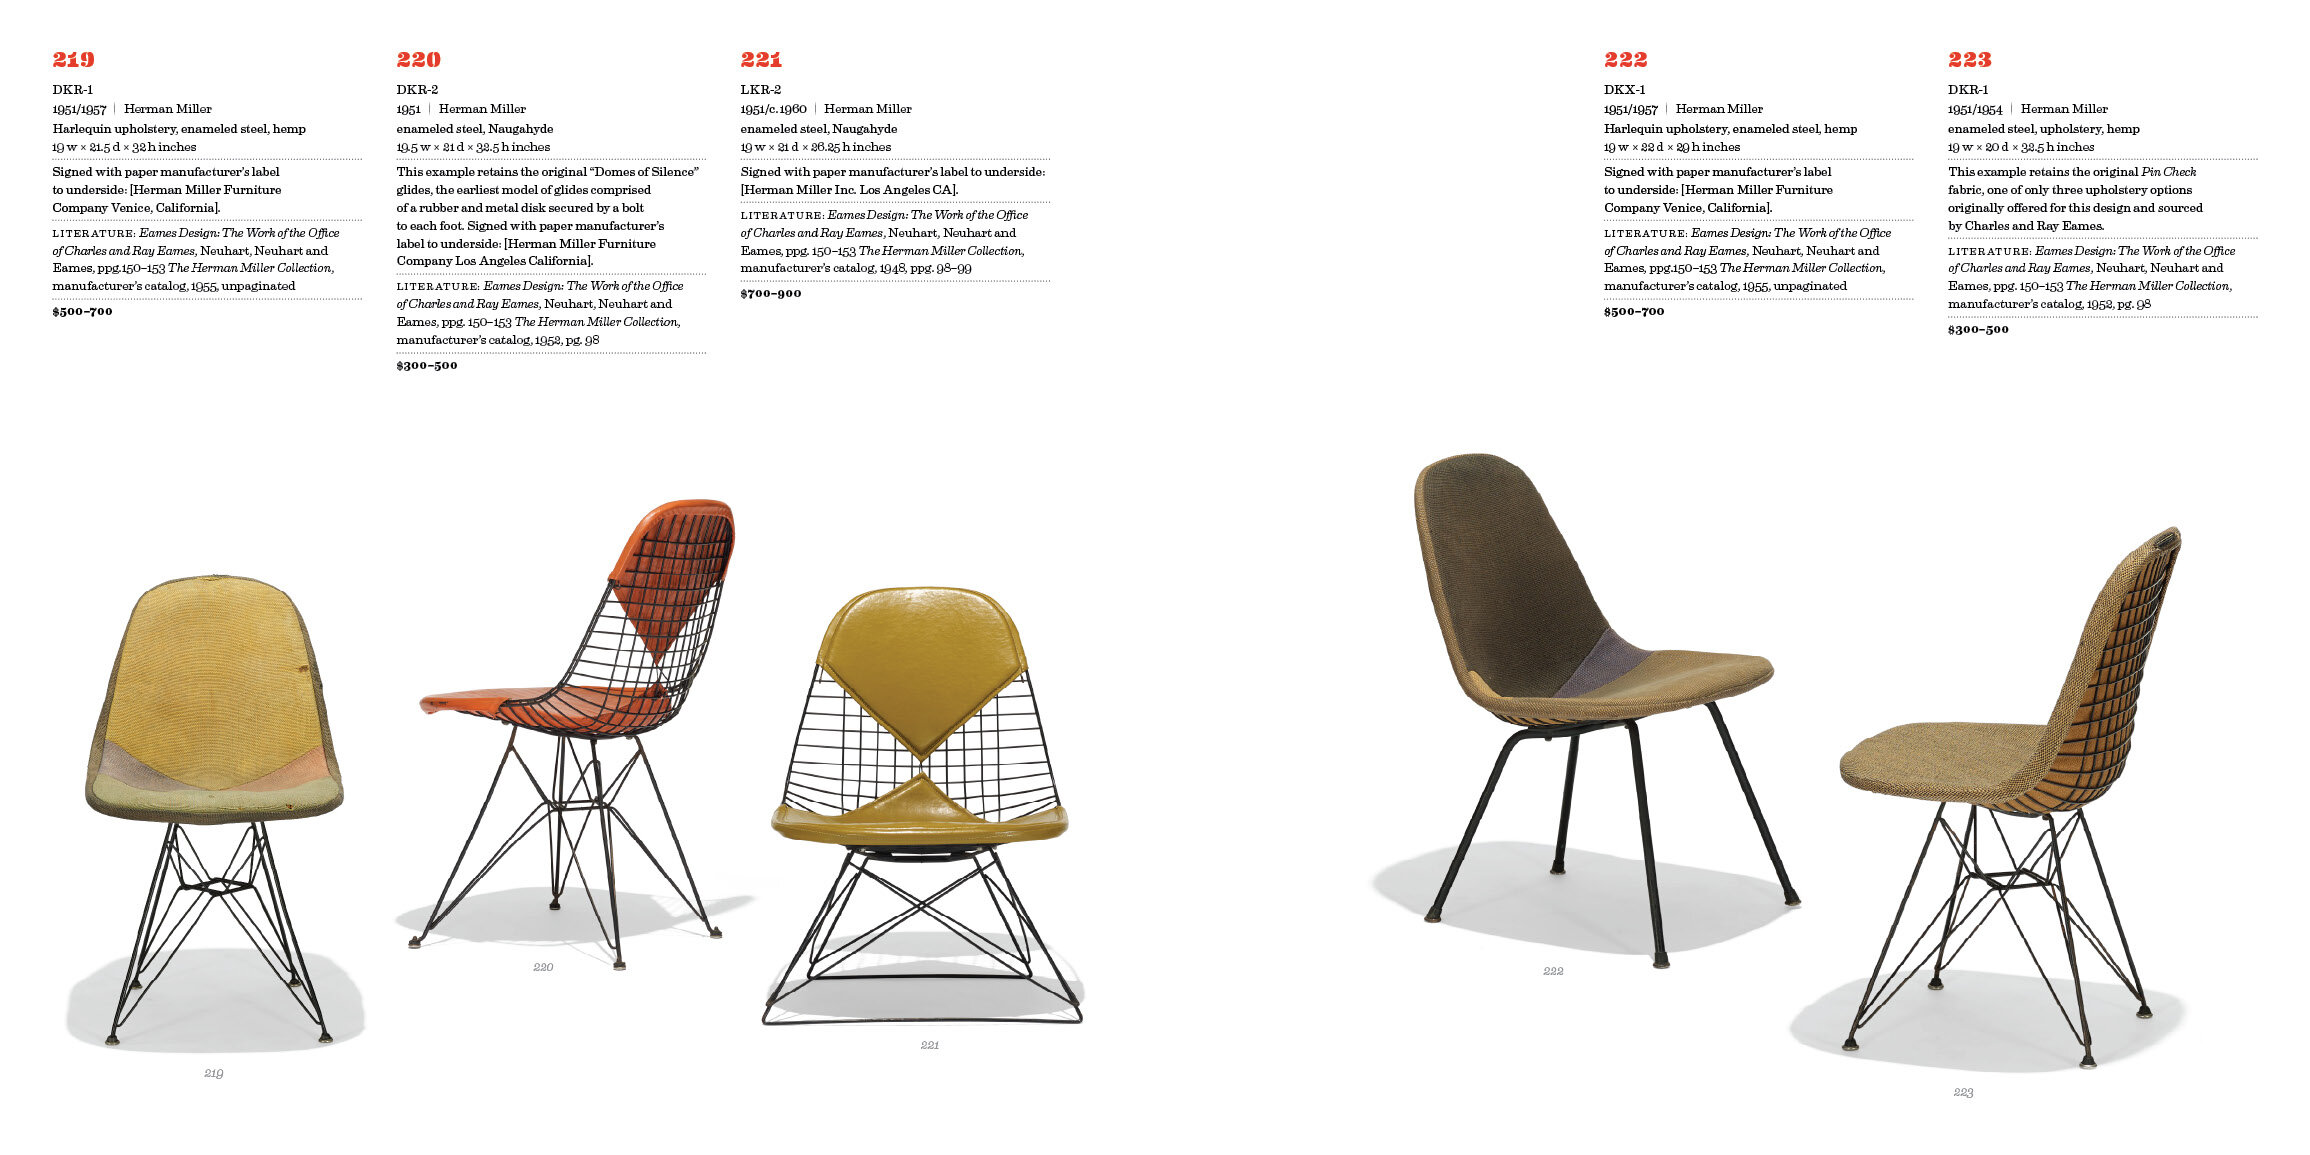 View or download the Eames Design: The JF Chen Collection catalog 